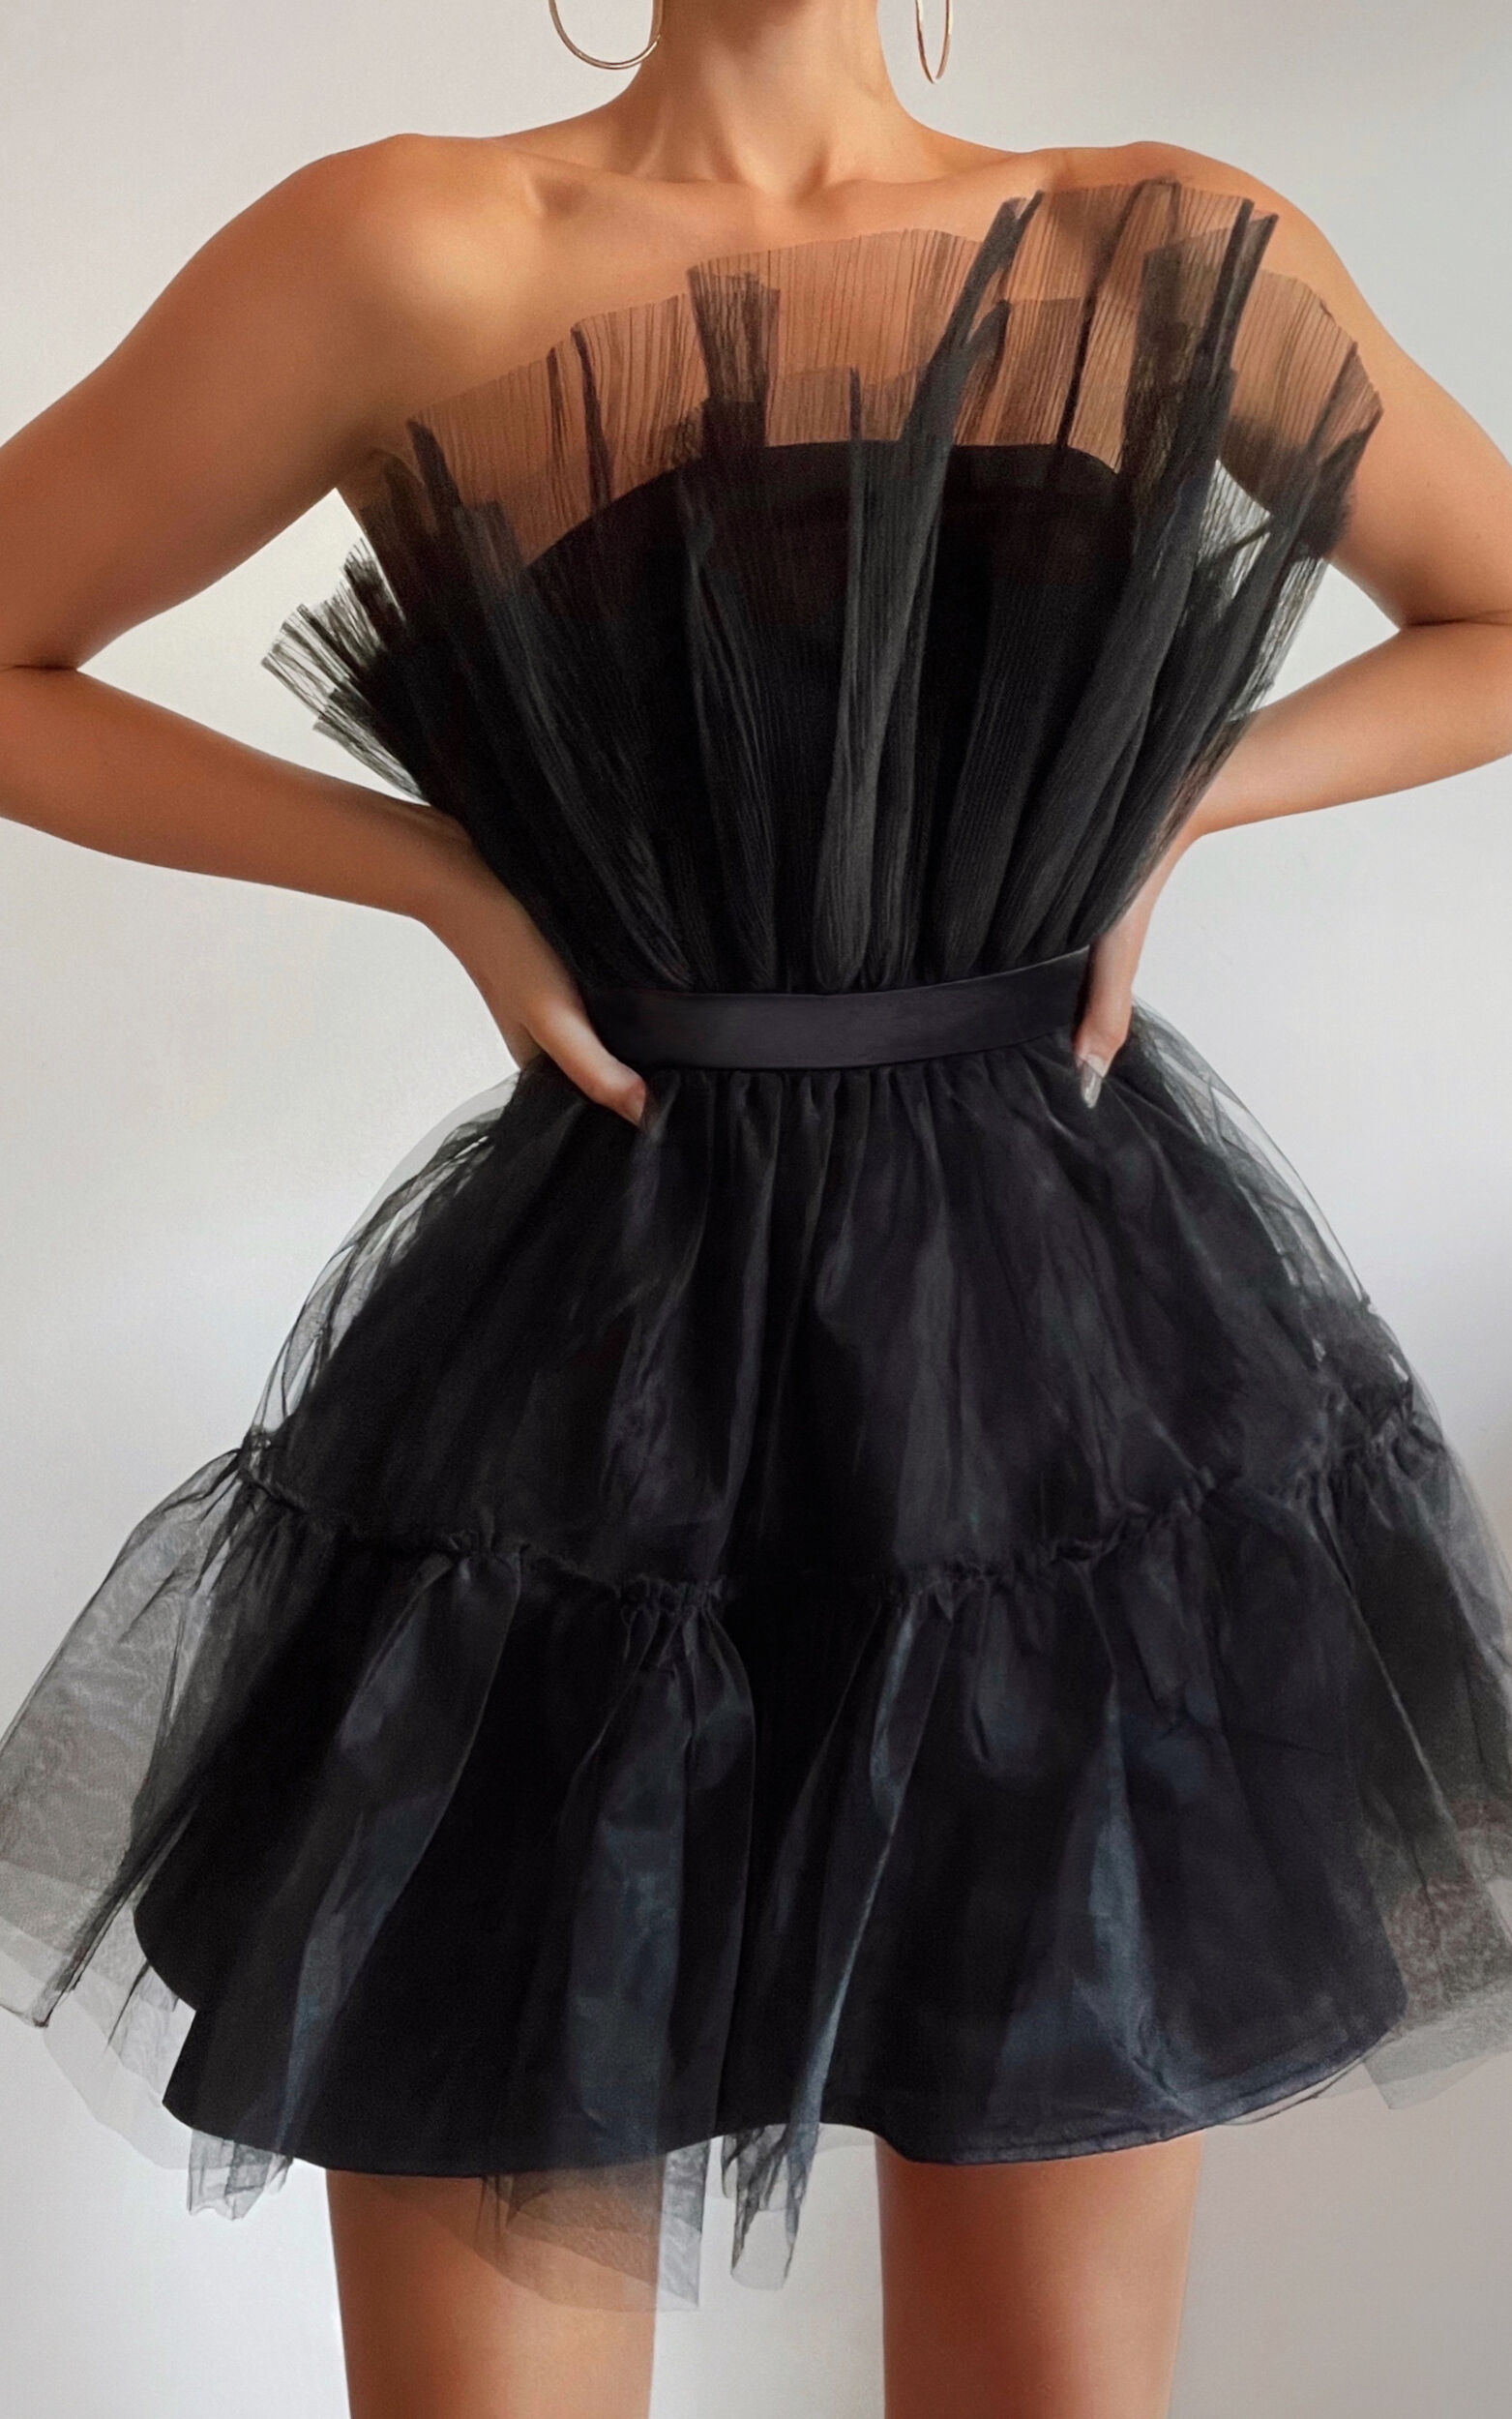 Amalya Mini Dress - Tiered Tulle Fit and Flare Dress in Black - 04, BLK1